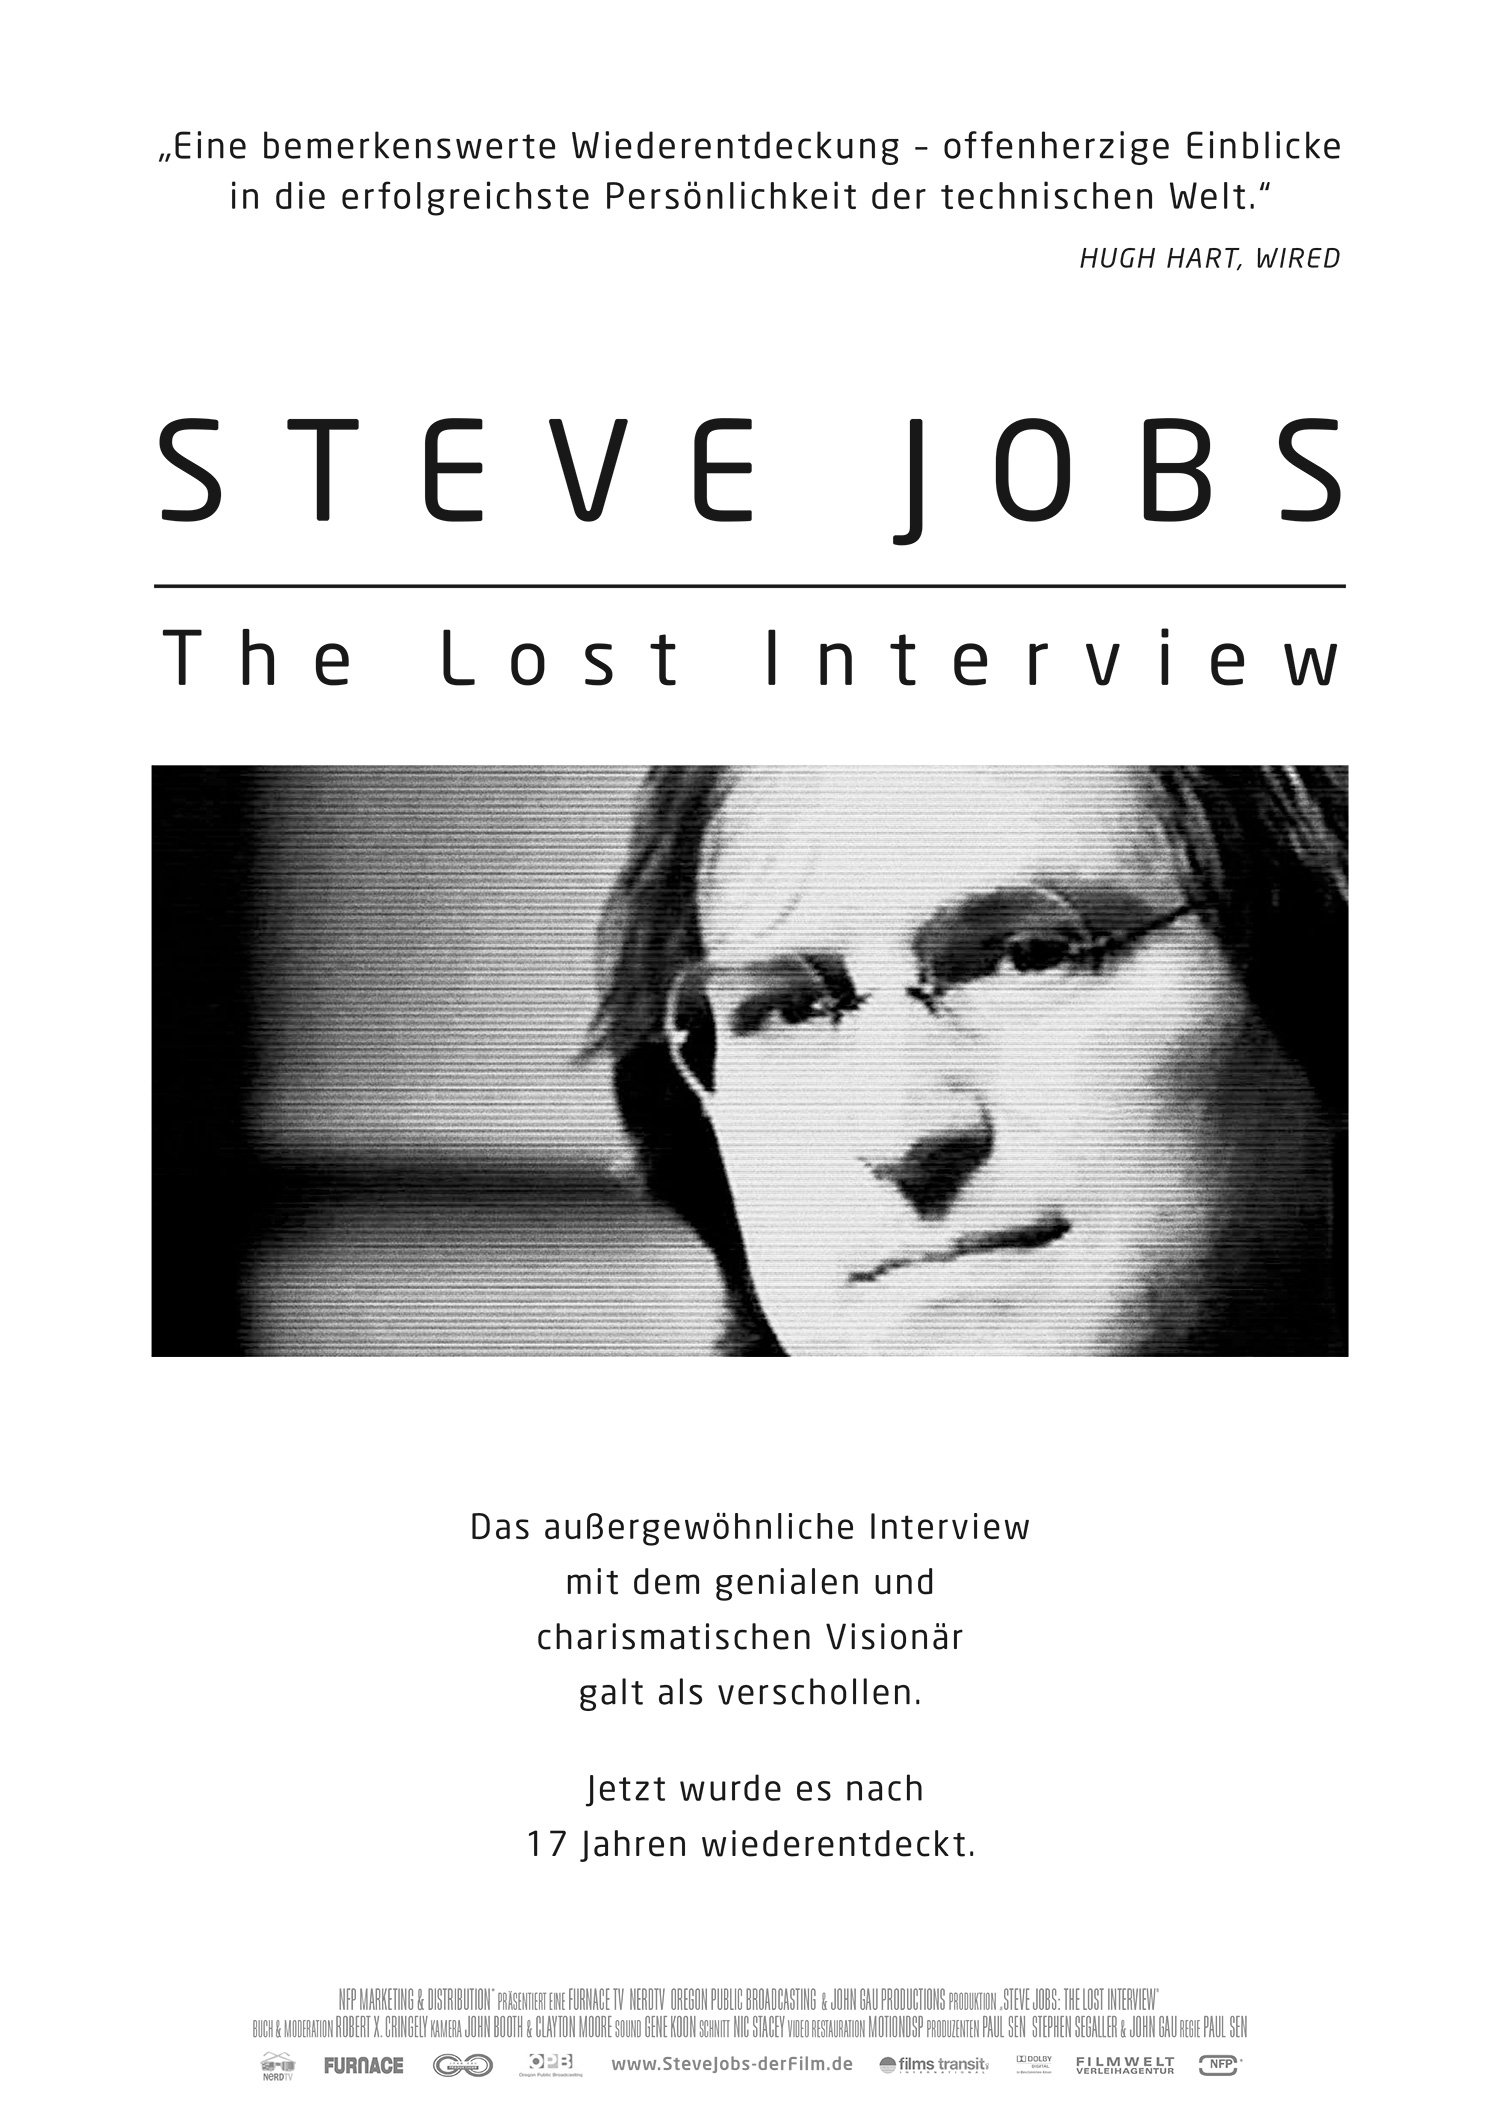 NFP*<a href="/steve-jobs">→</a><strong>Adaption</strong>